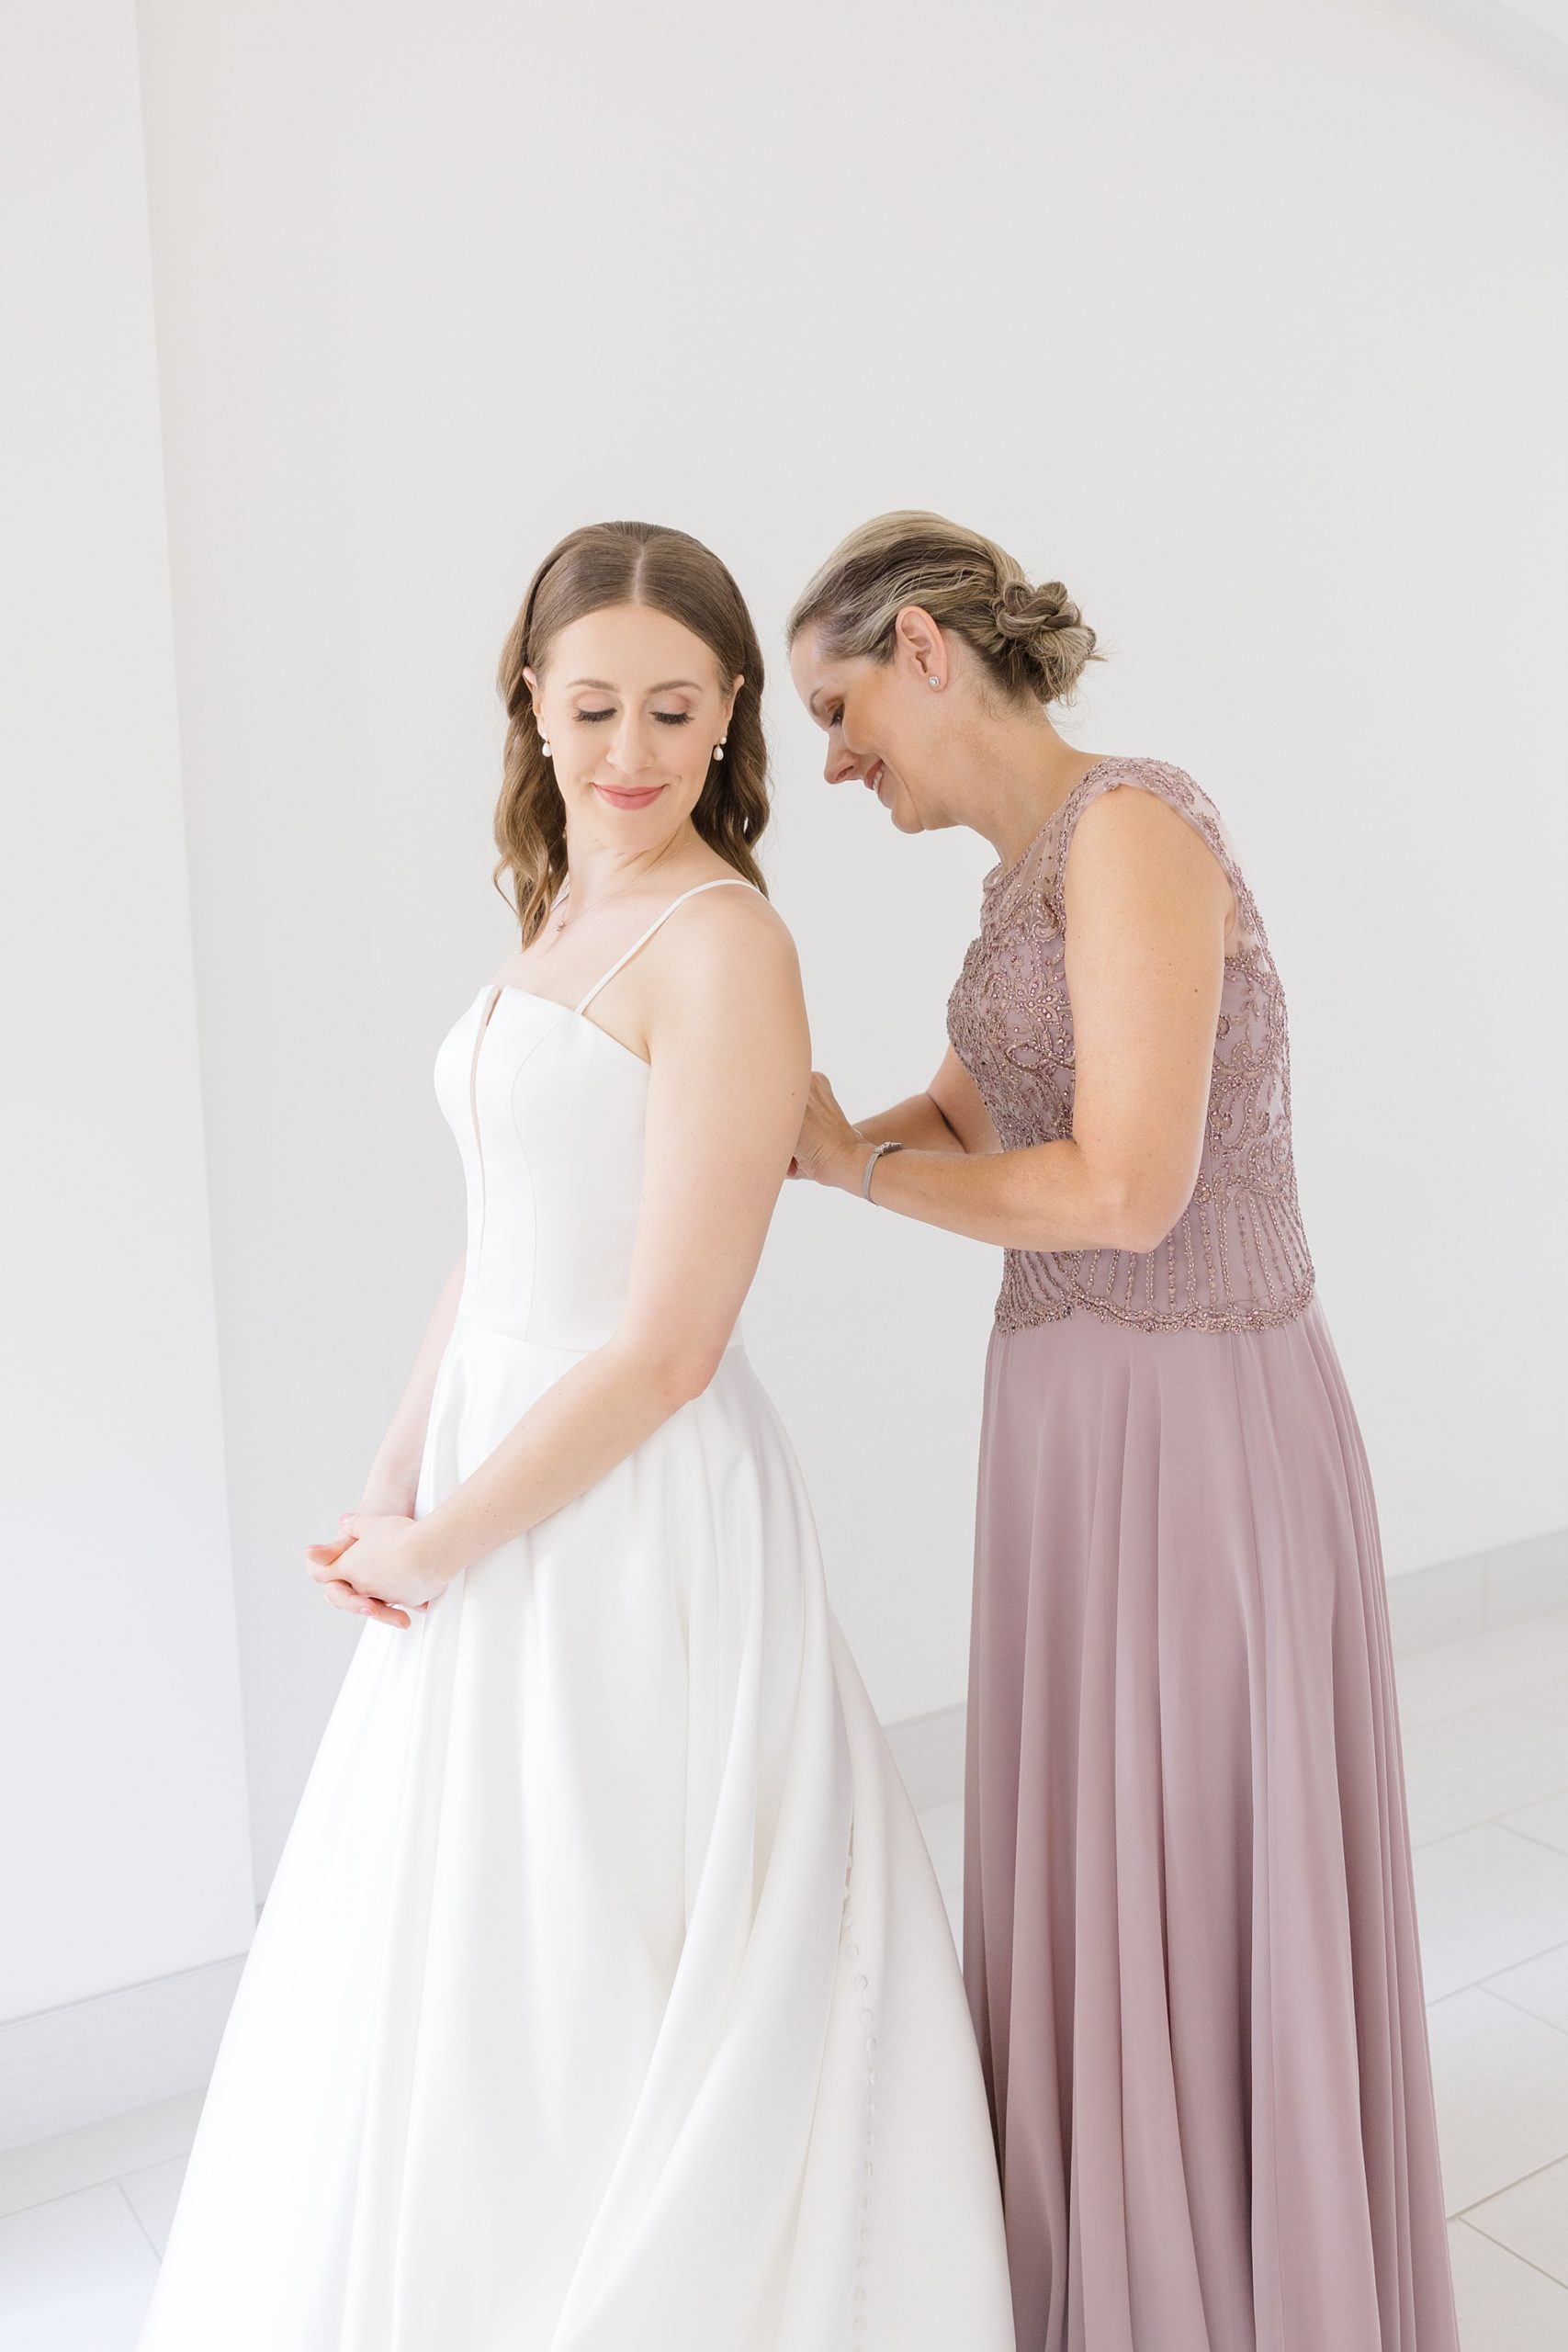 bridesmaid in pink gown helps bride into wedding gown